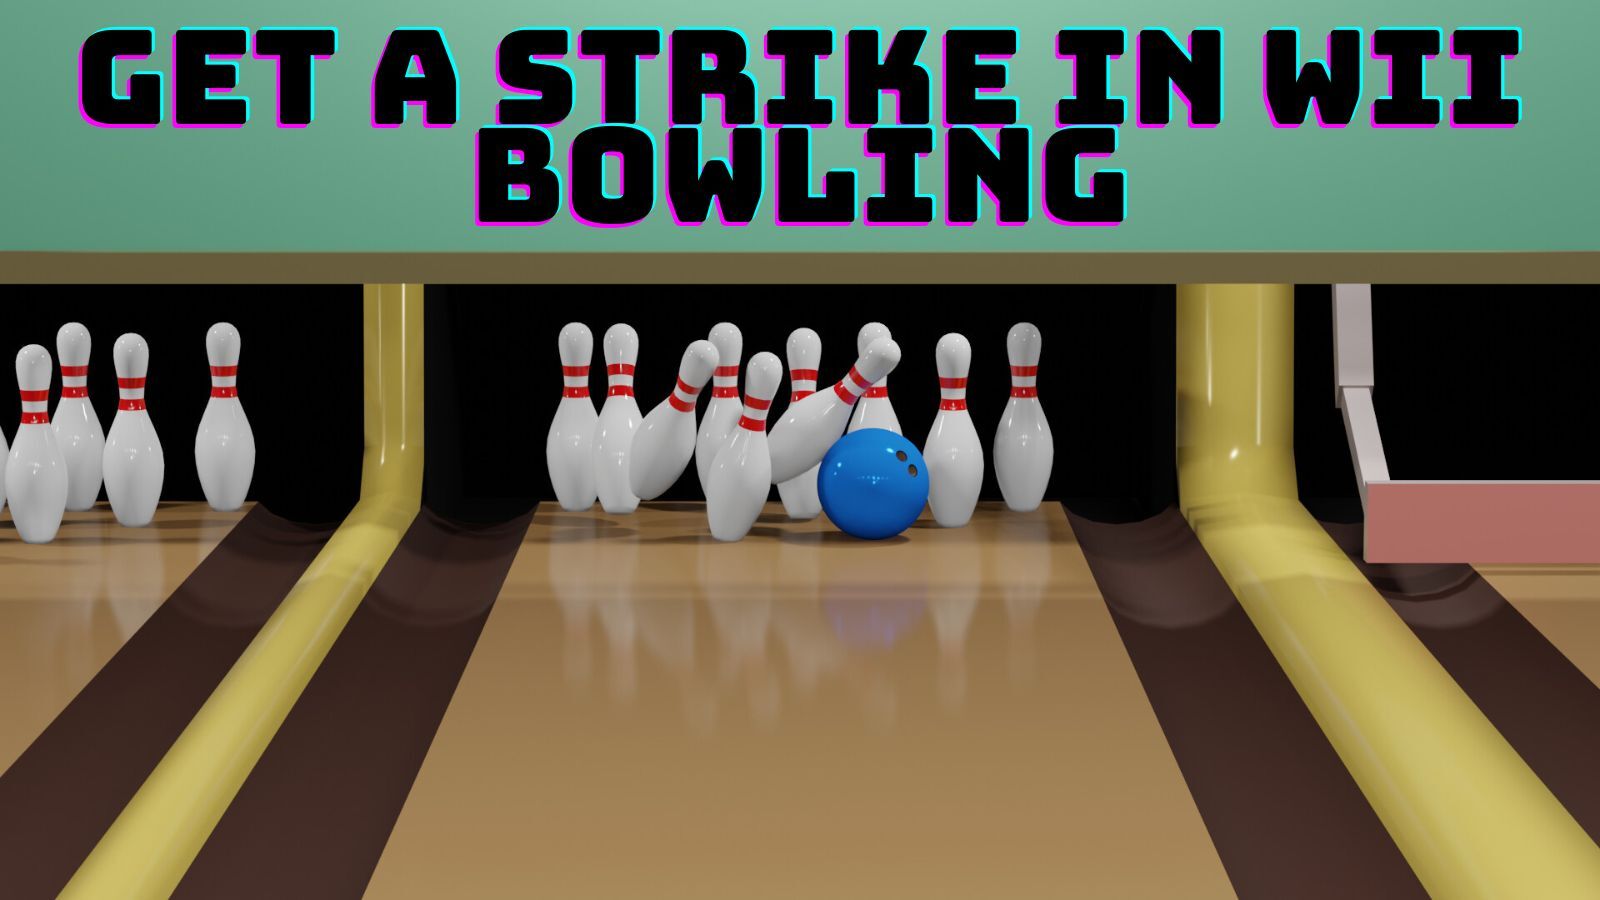 How to get a strike in Wii bowling? [Step Guides]